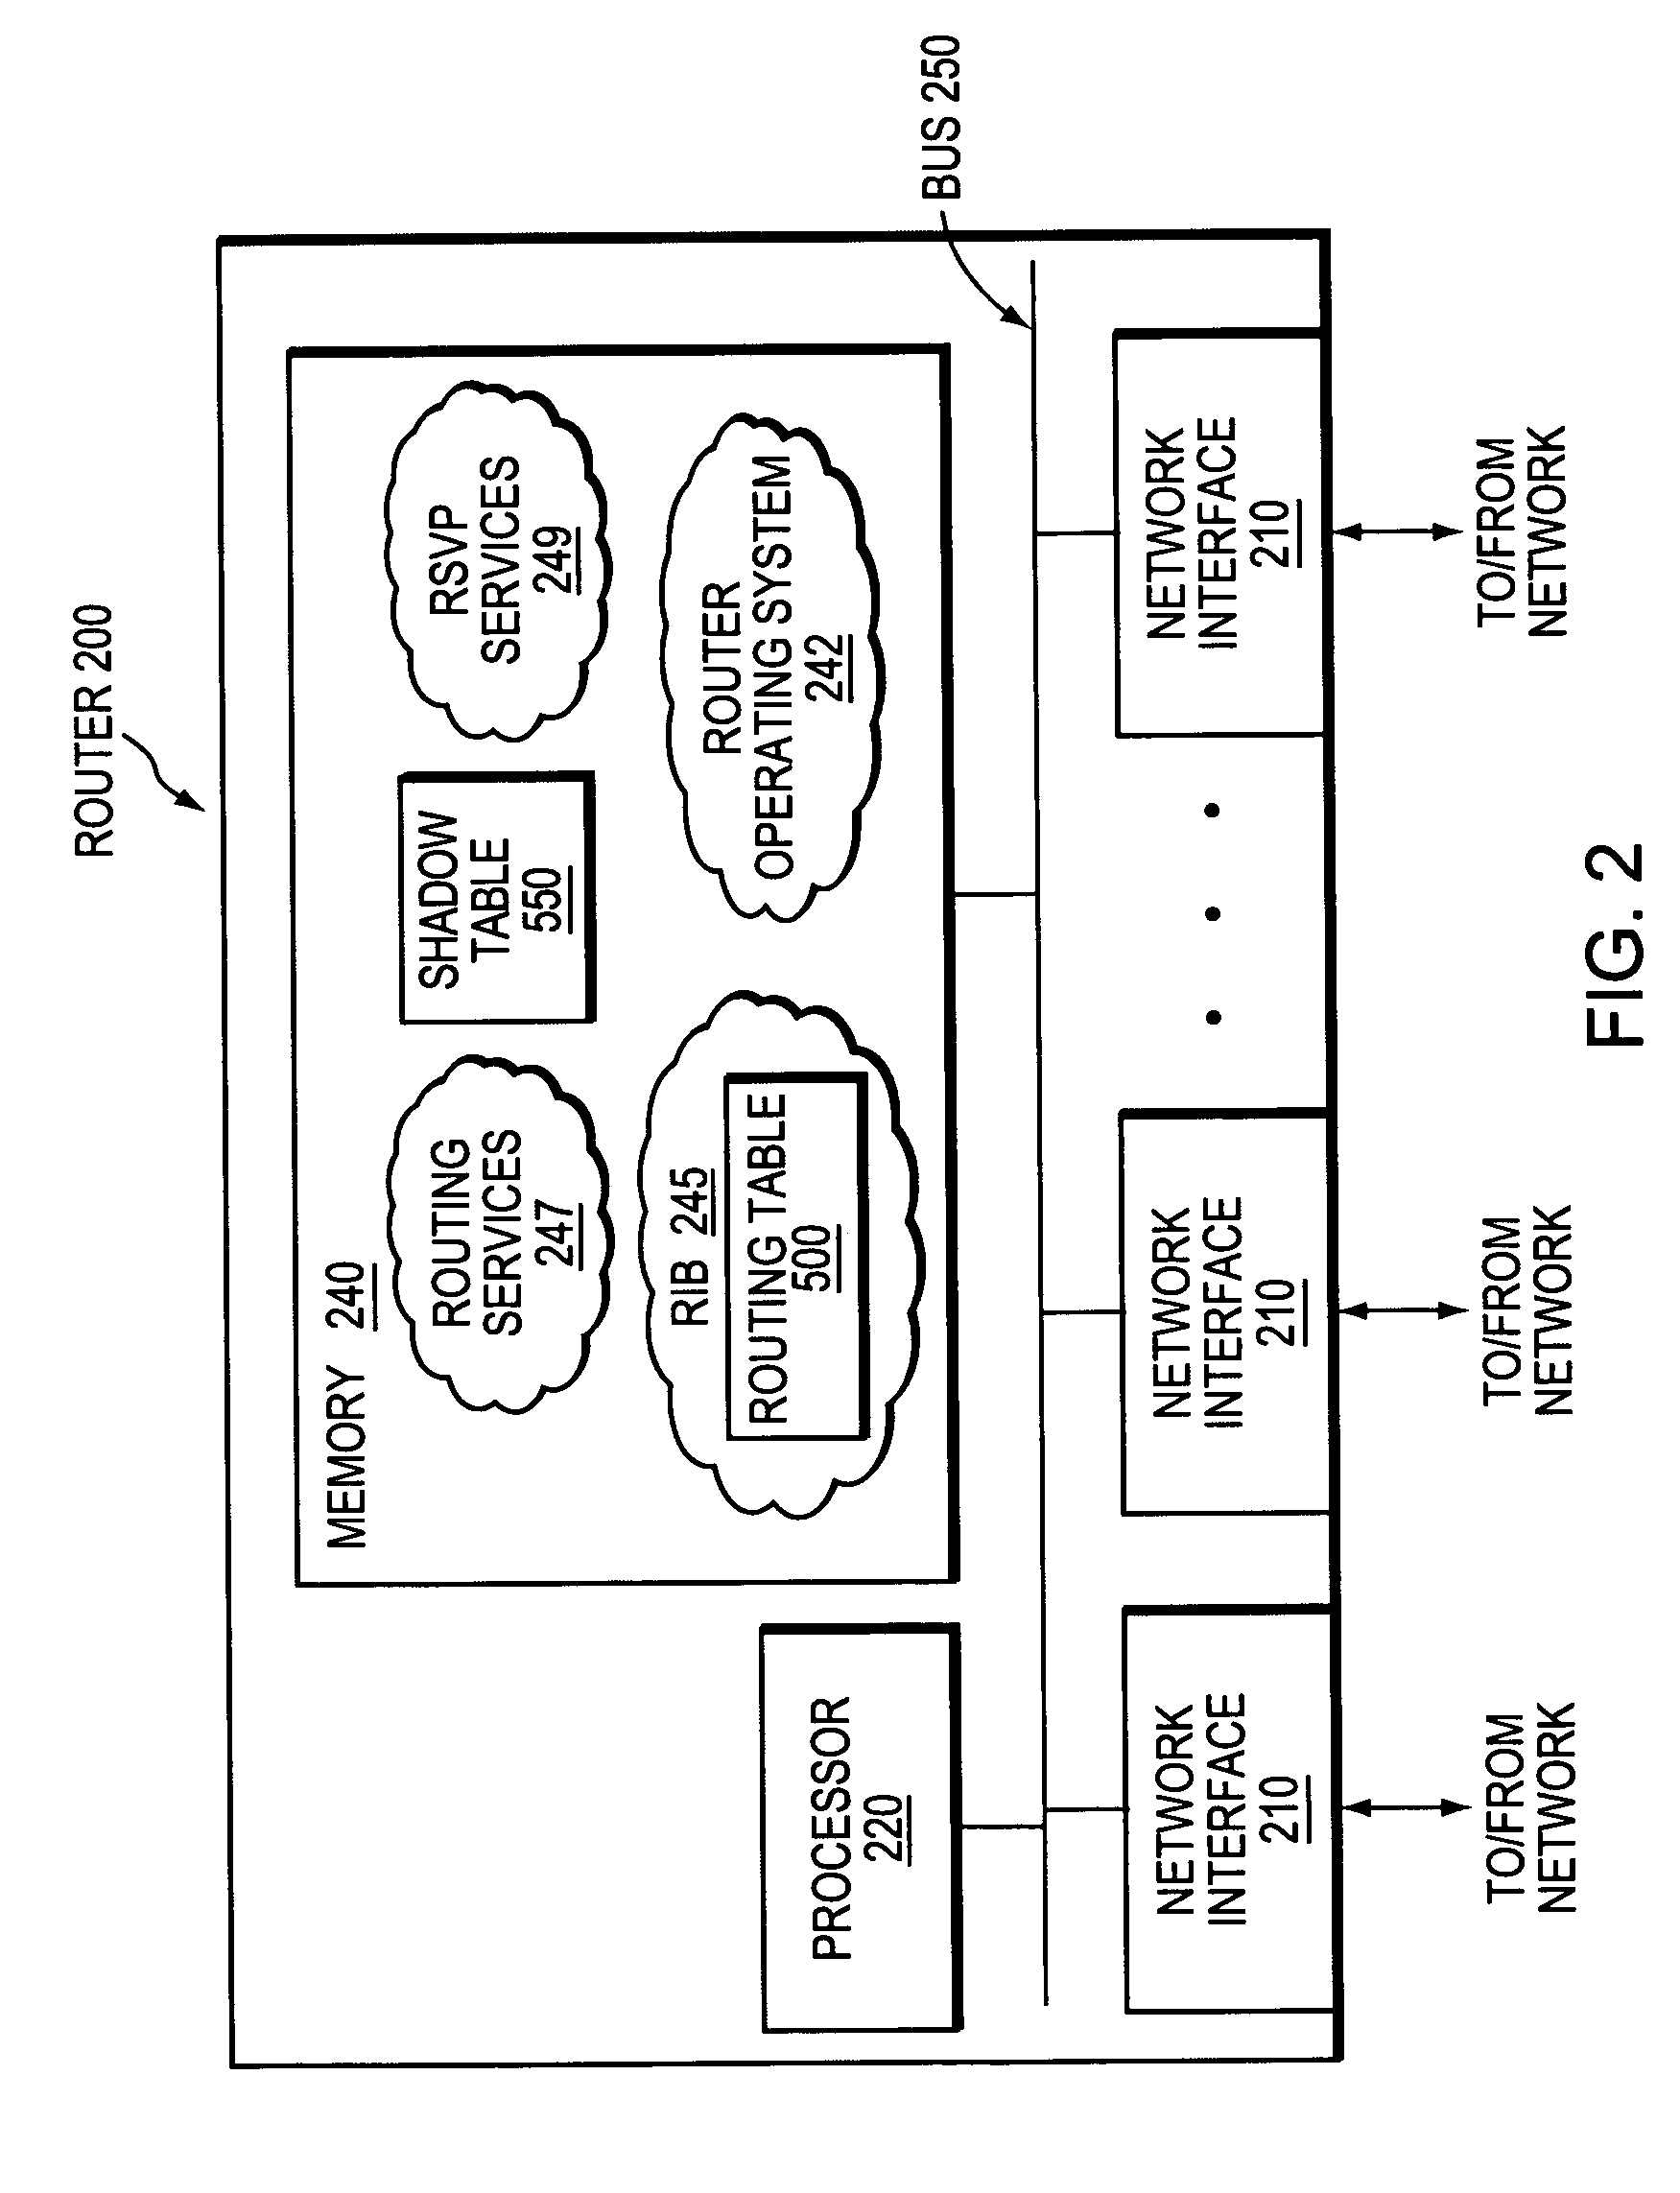 Border router protection with backup tunnel stitching in a computer network